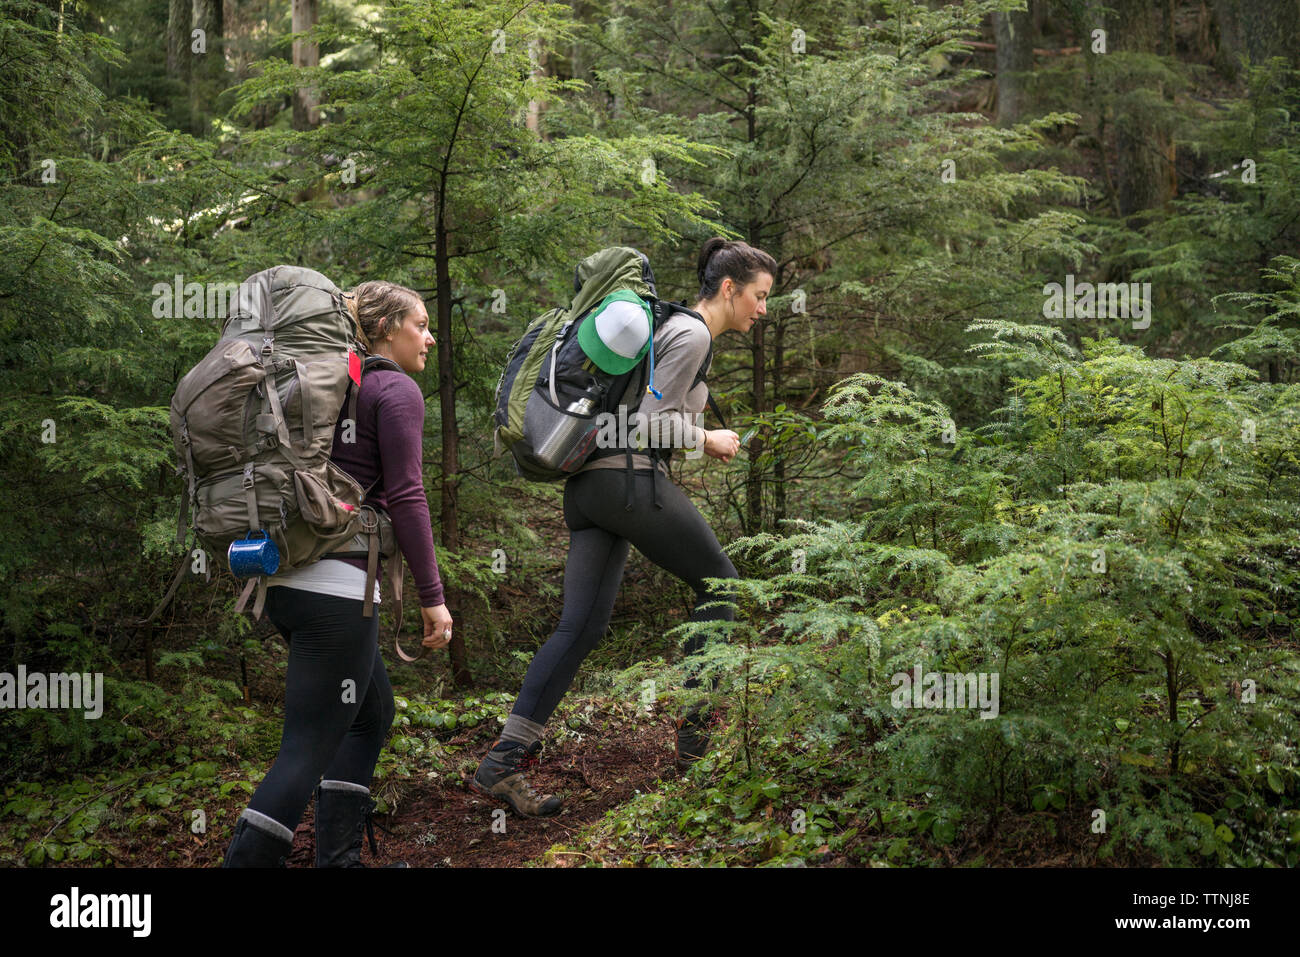 Low angle view of women hiking amidst trees in forest Stock Photo